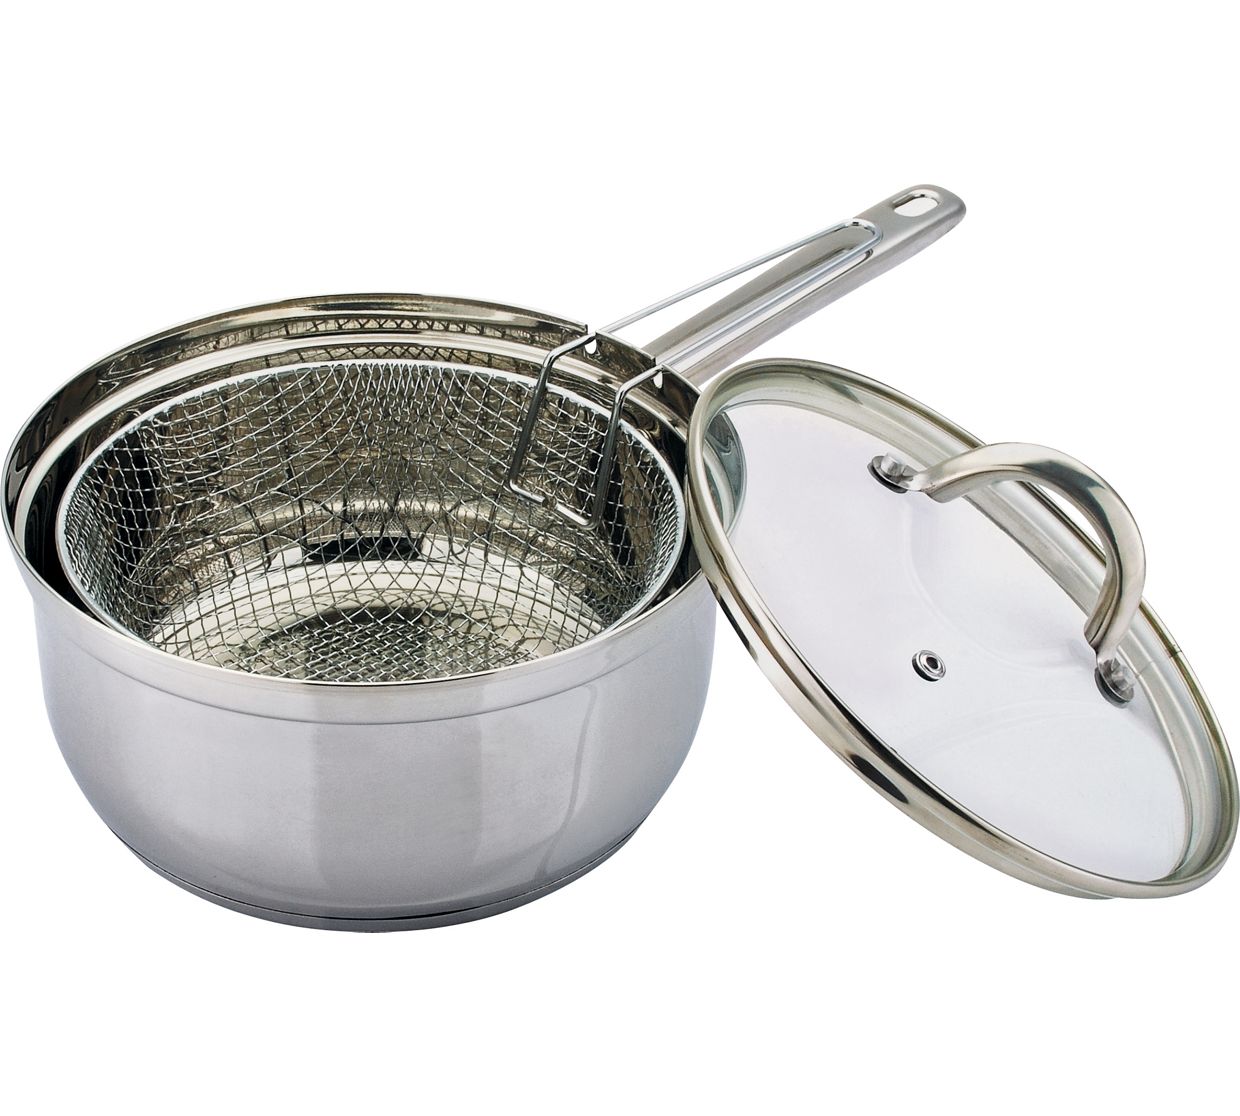 22cm stainless steel Chip Pan Induction Fryer Pot With Lid & Basket NEW 